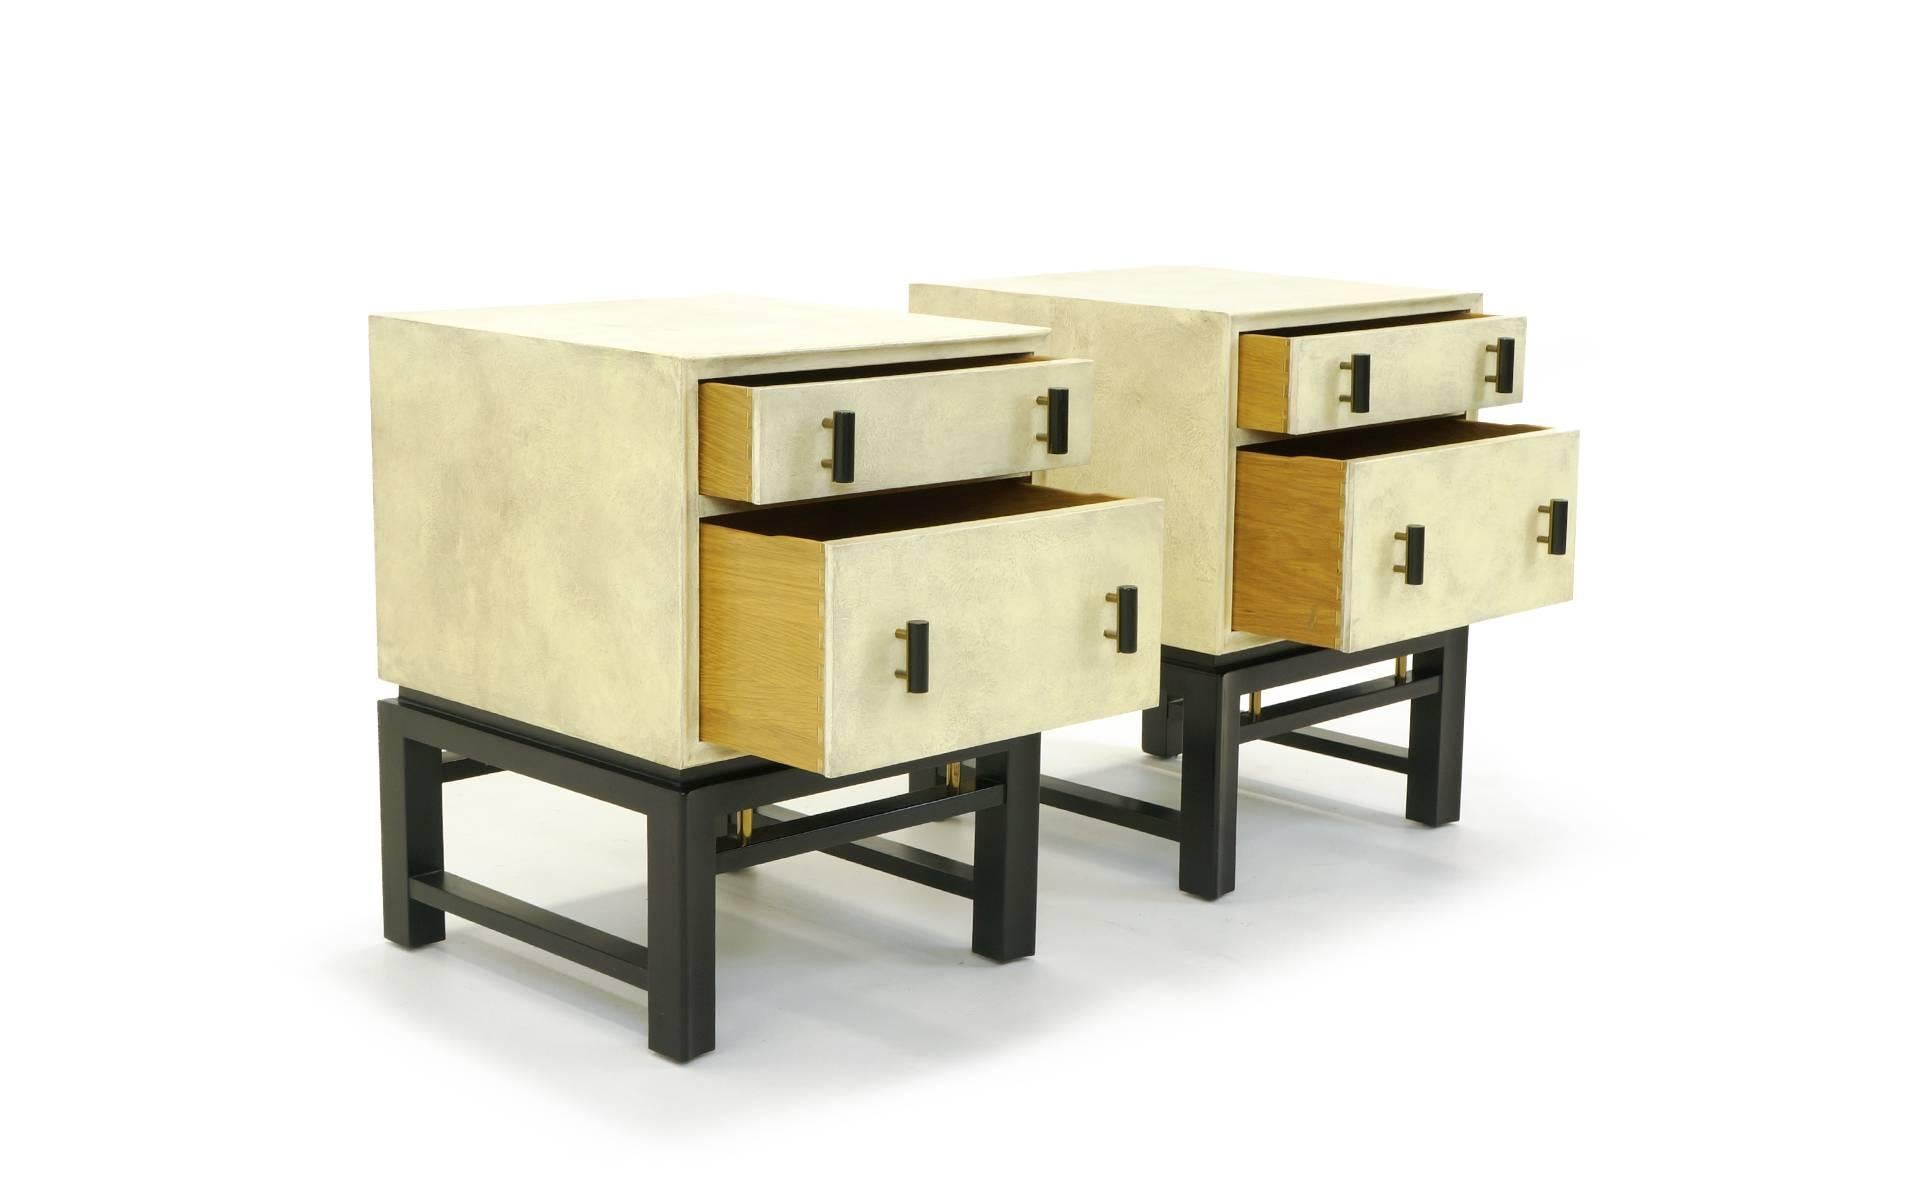 Near perfect condition lacquered goatskin nightstands or side tables designed by Edward Wormley. All original, exceptional examples.